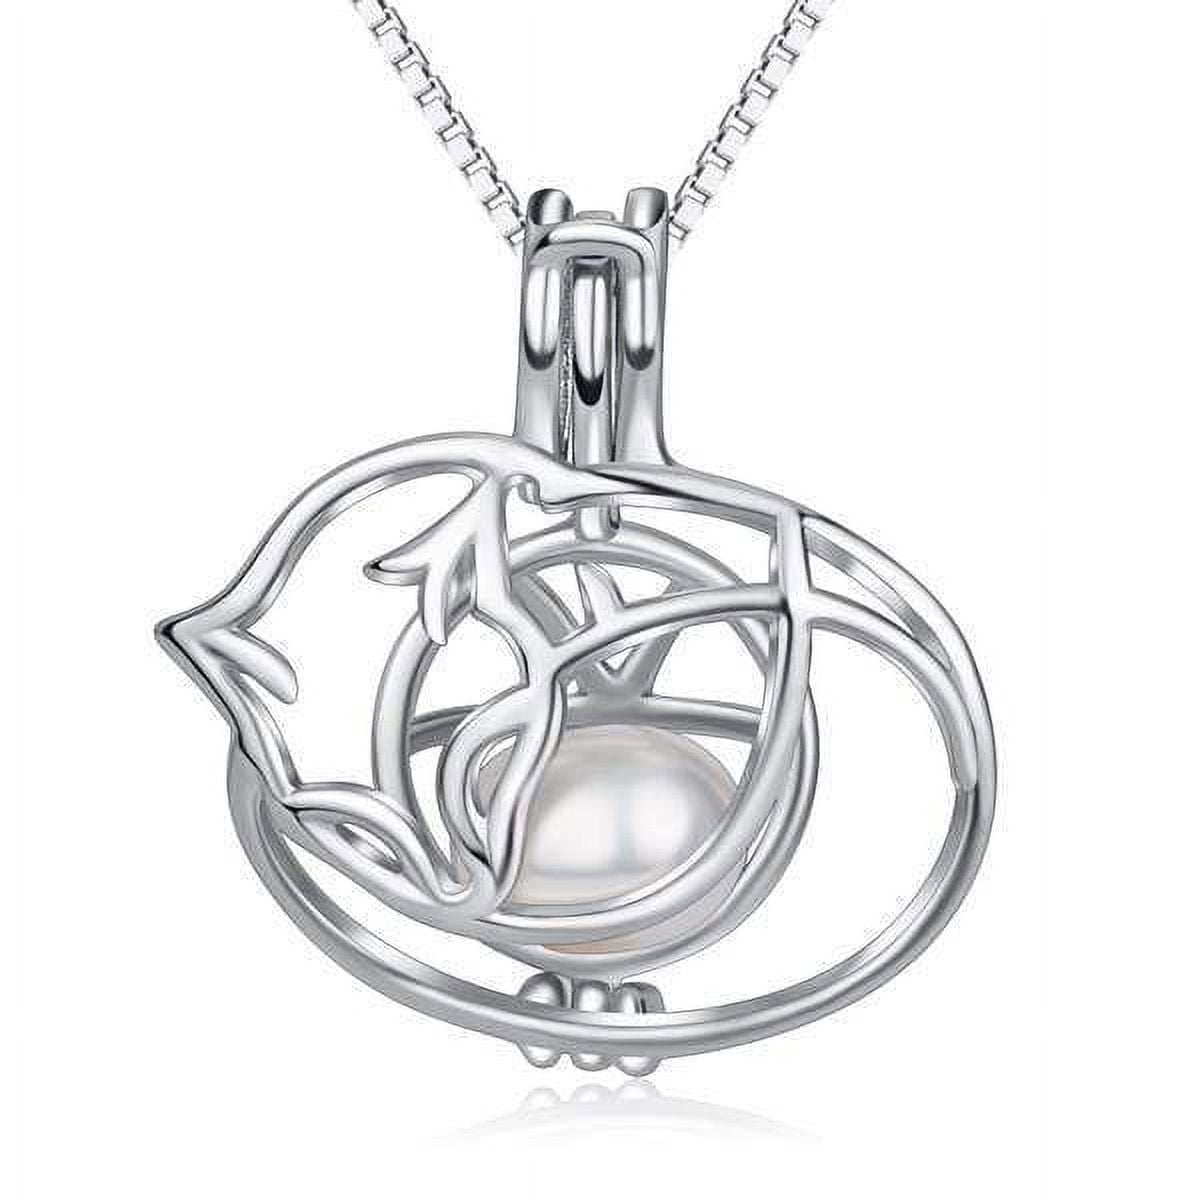 Pearl Cage Necklace Pendant Lockets Essential Oil Diffuser Lotus Provides  Silver Plated Silver Plus Your Own Pearl Makes It More Attractive From  Towardsthe, $6.53 | DHgate.Com